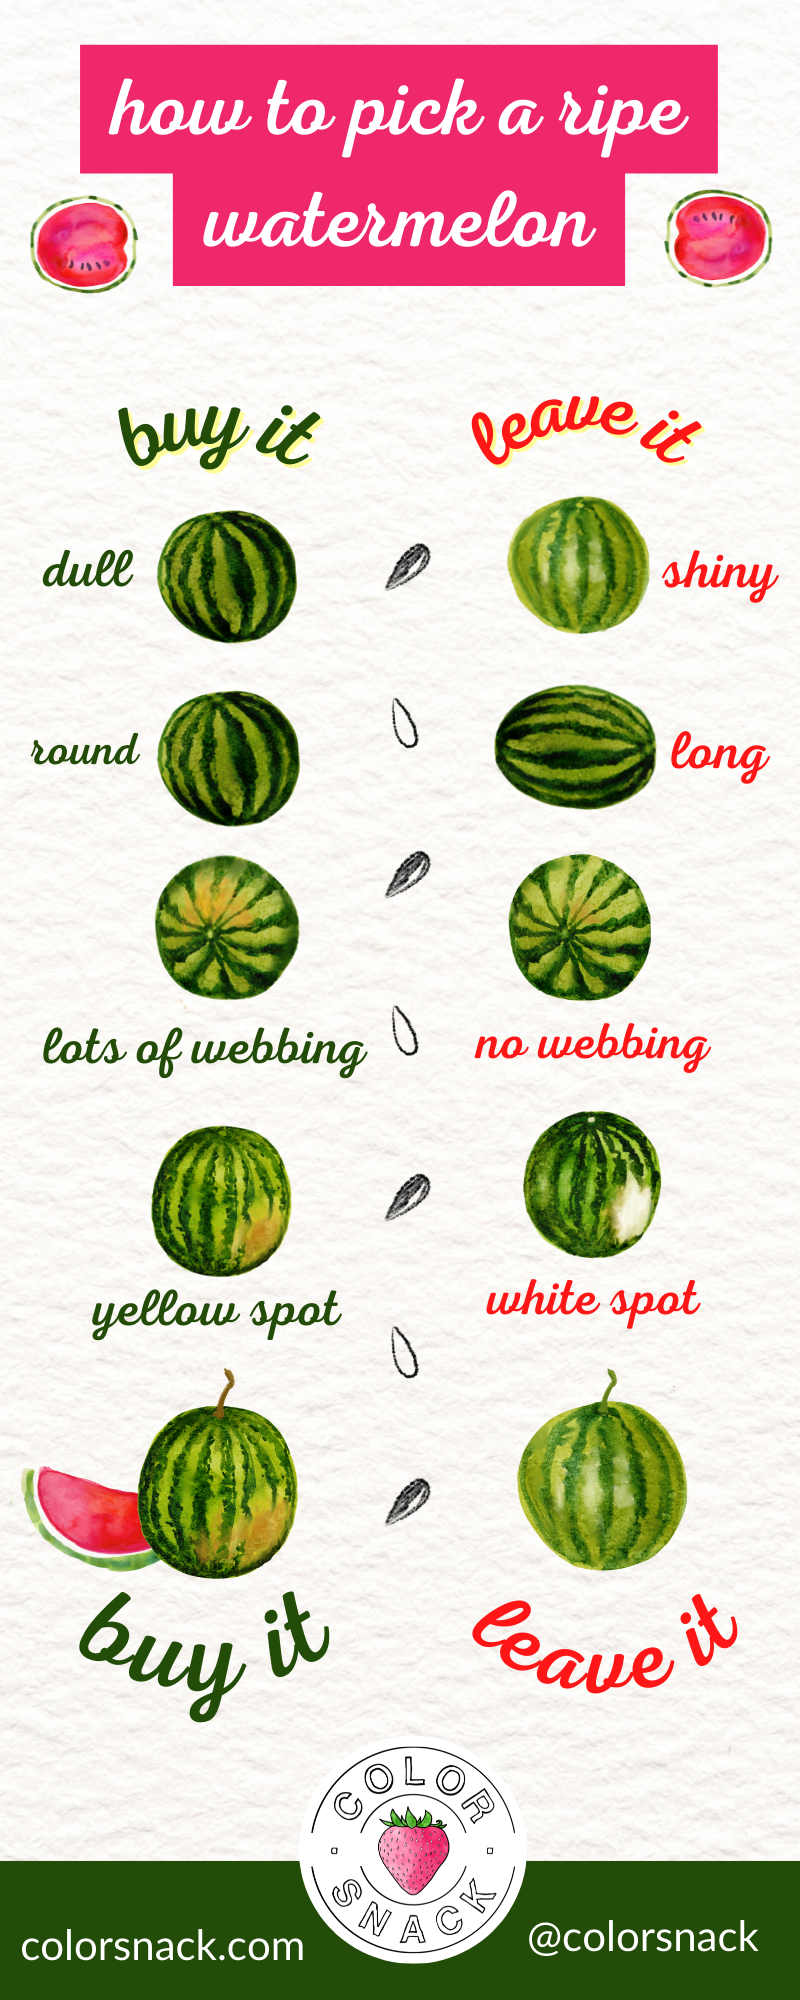 how to pick a ripe watermelon watercolor infographic